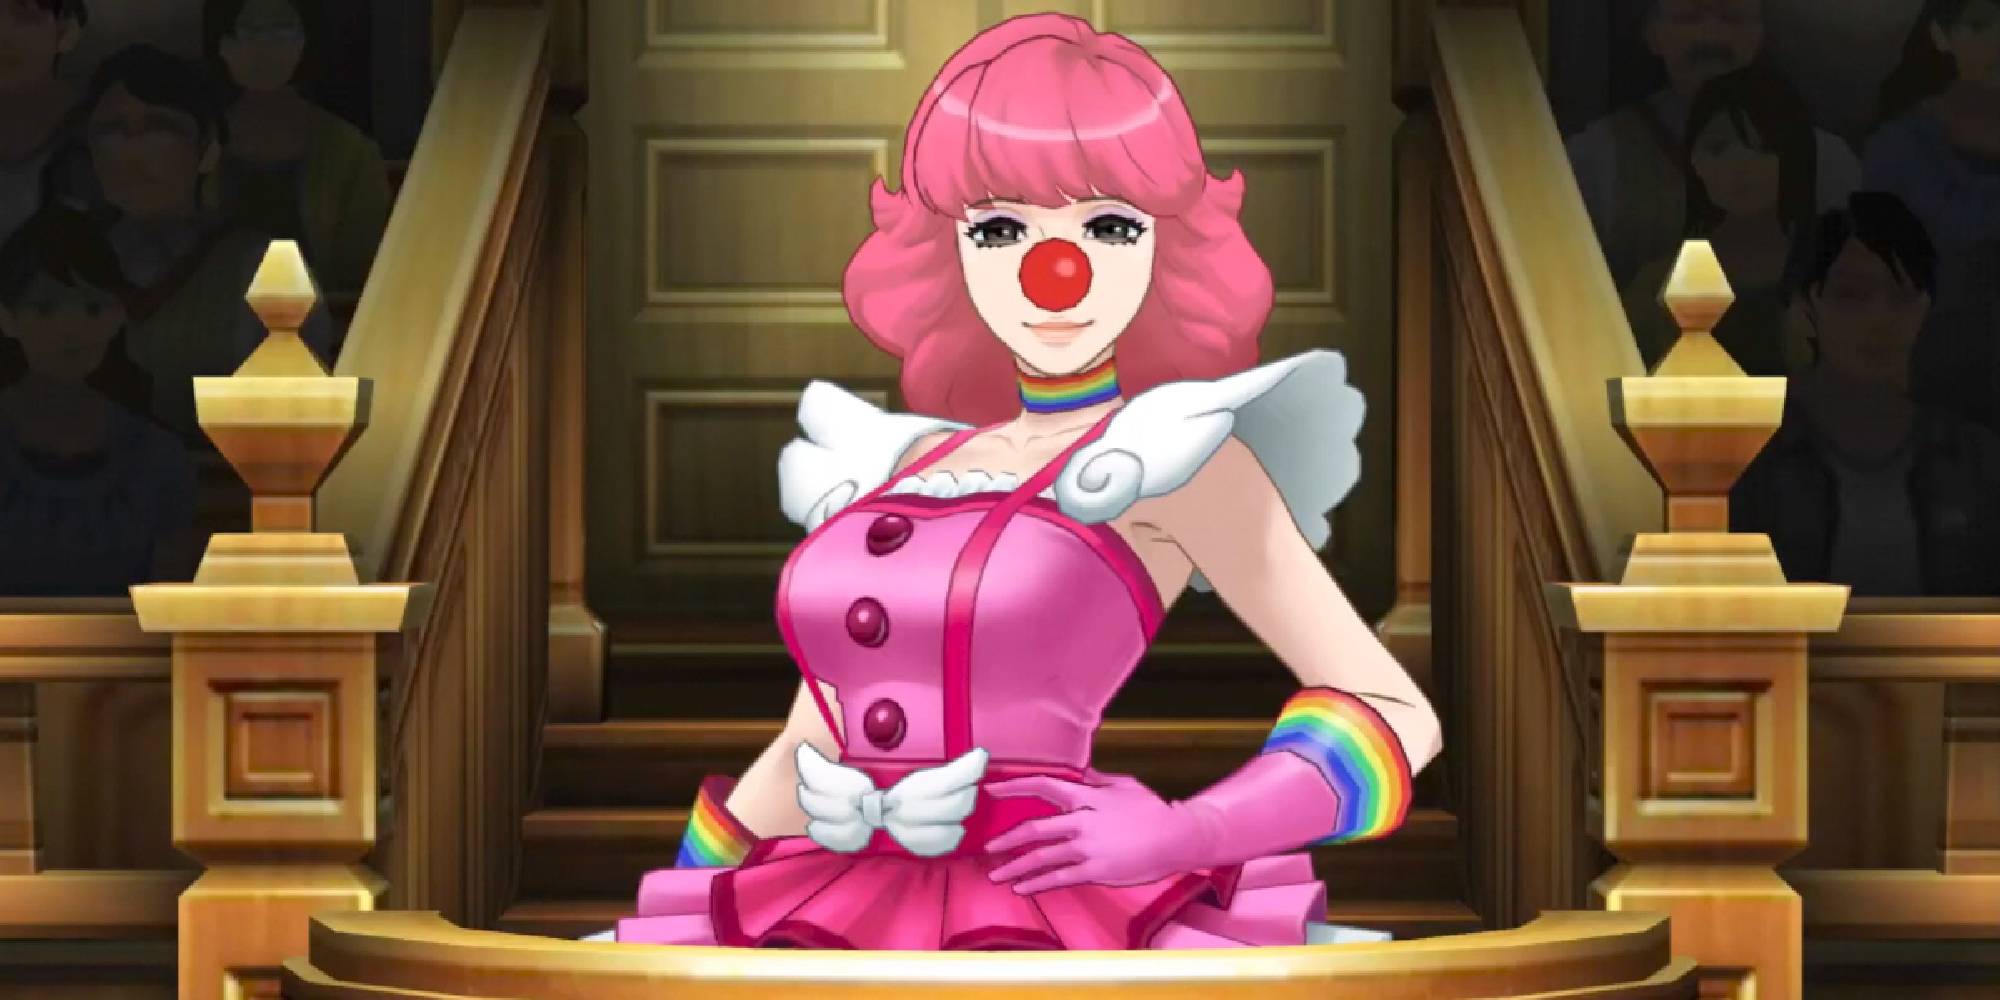 Ace attorney spirit of justice clown